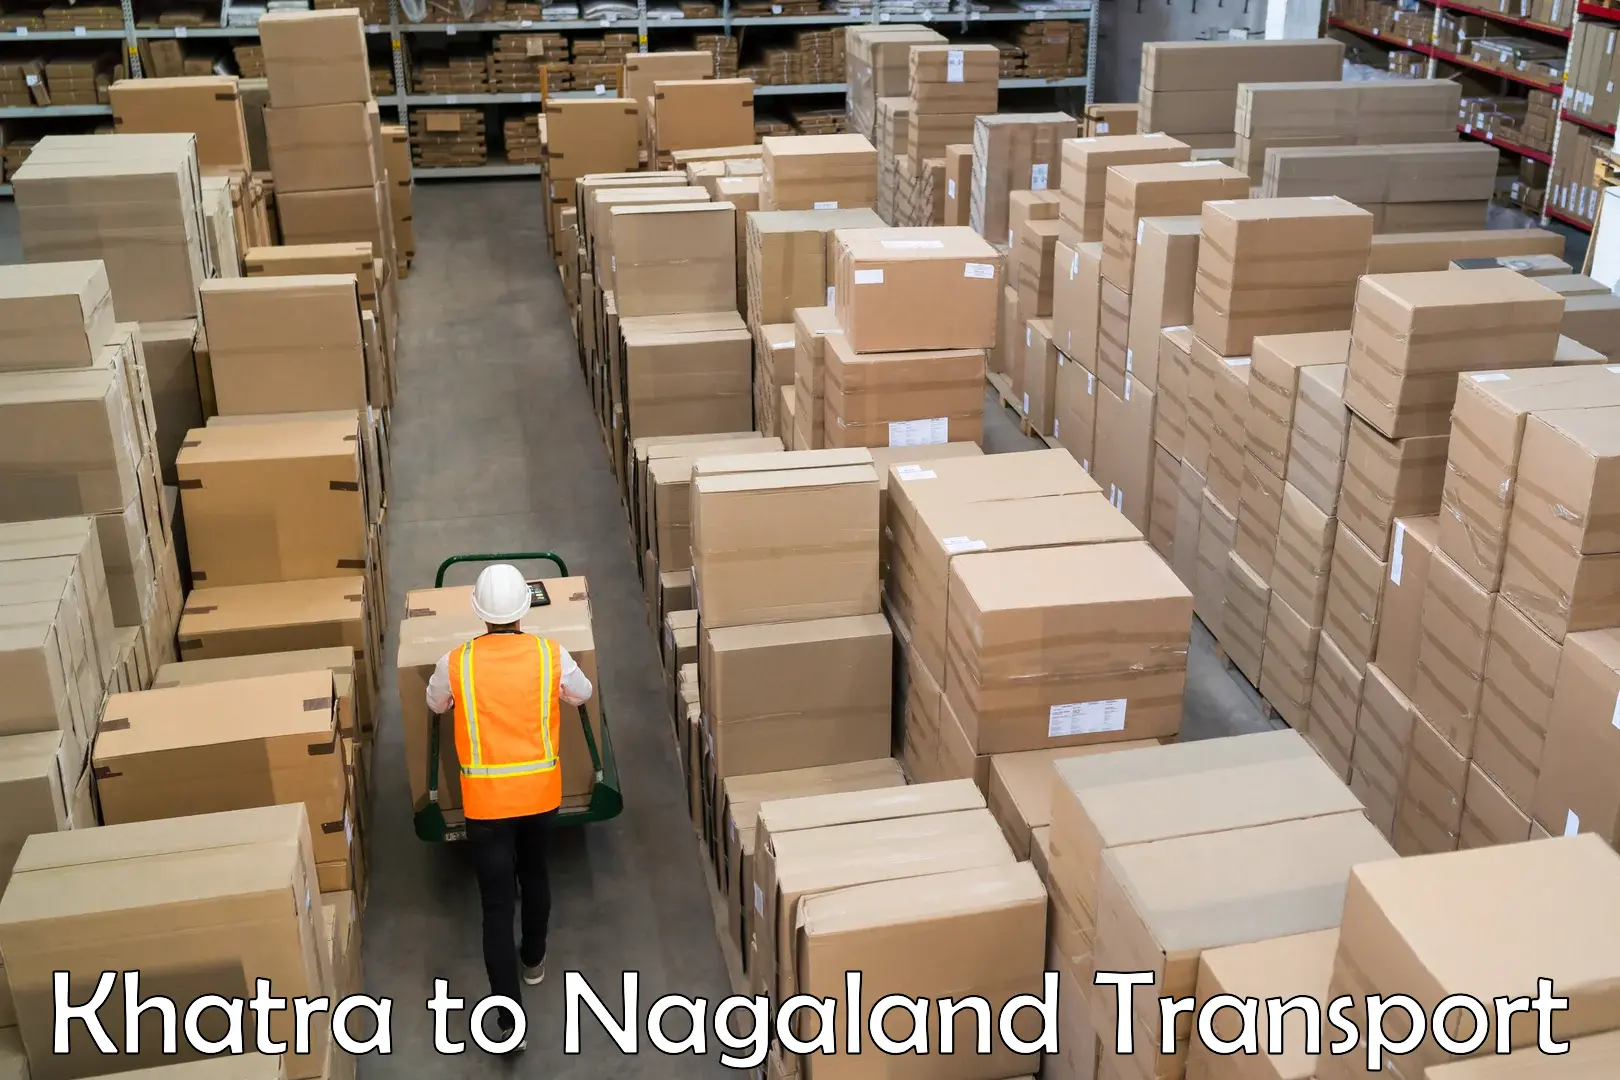 Truck transport companies in India in Khatra to Nagaland